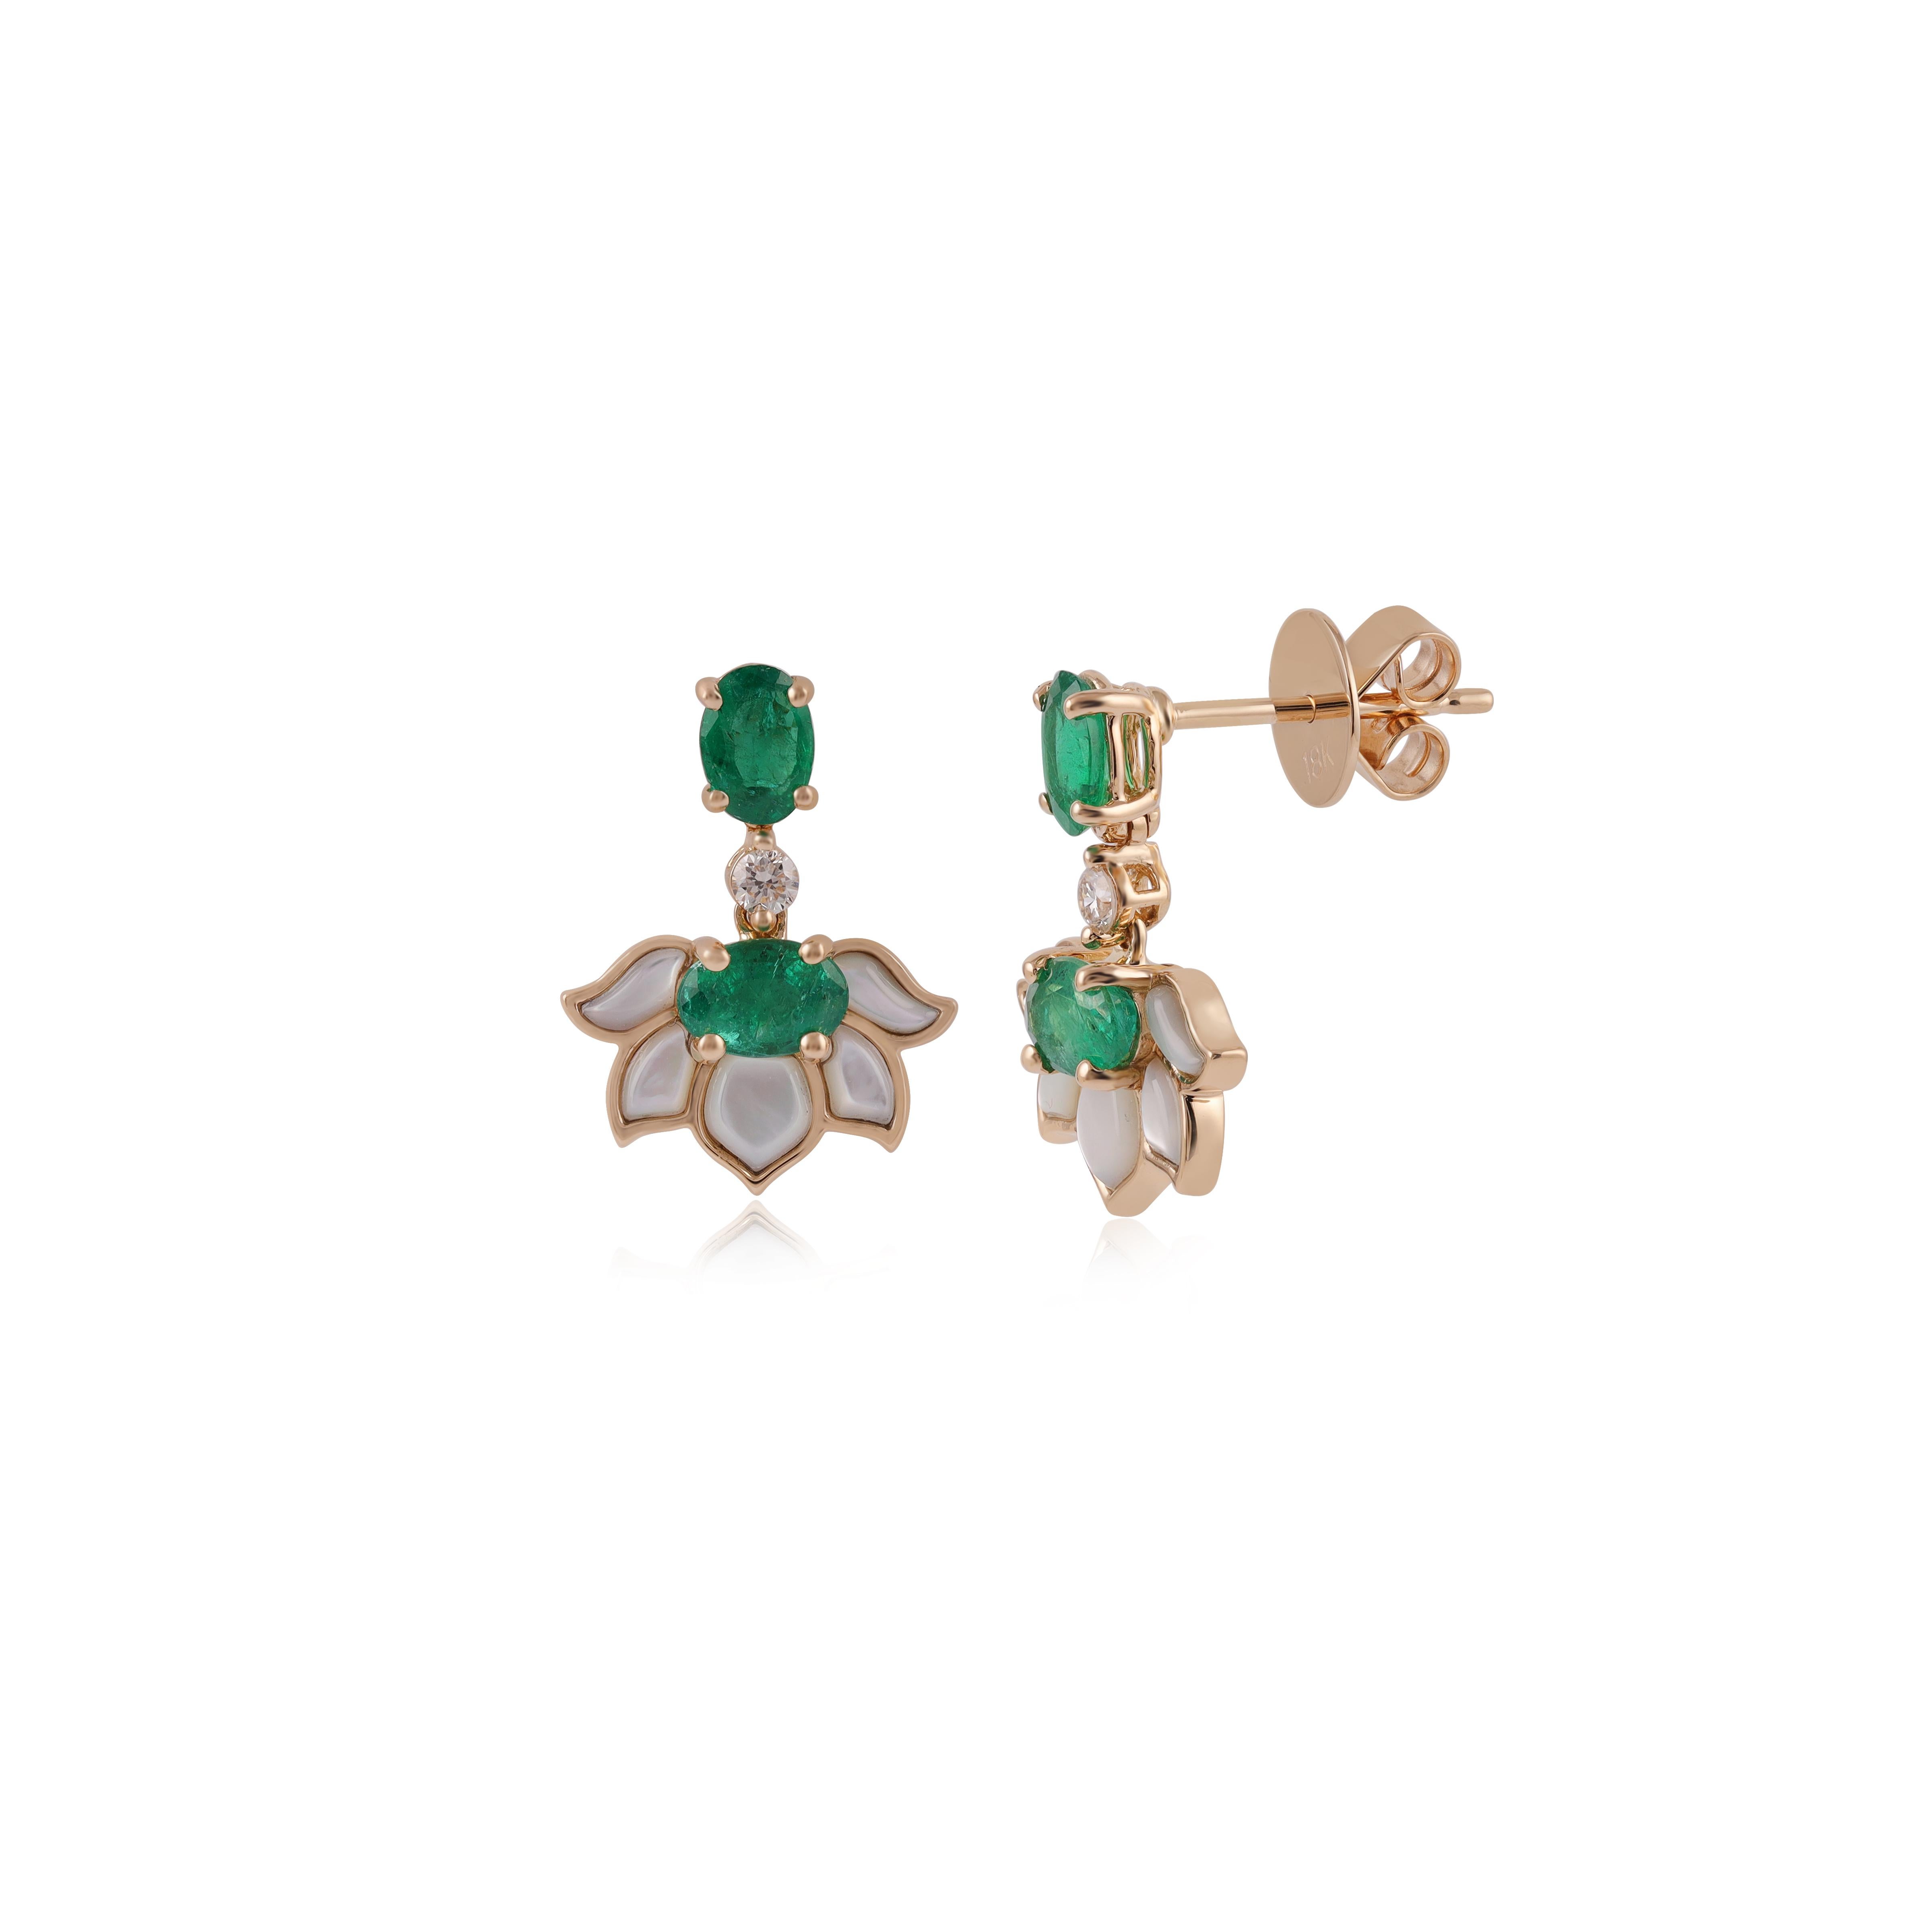 Oval Cut 1.77 Carat Emerald, Mother of Pearl & Round Diamonds Earrings in 18k Yellow Gold For Sale